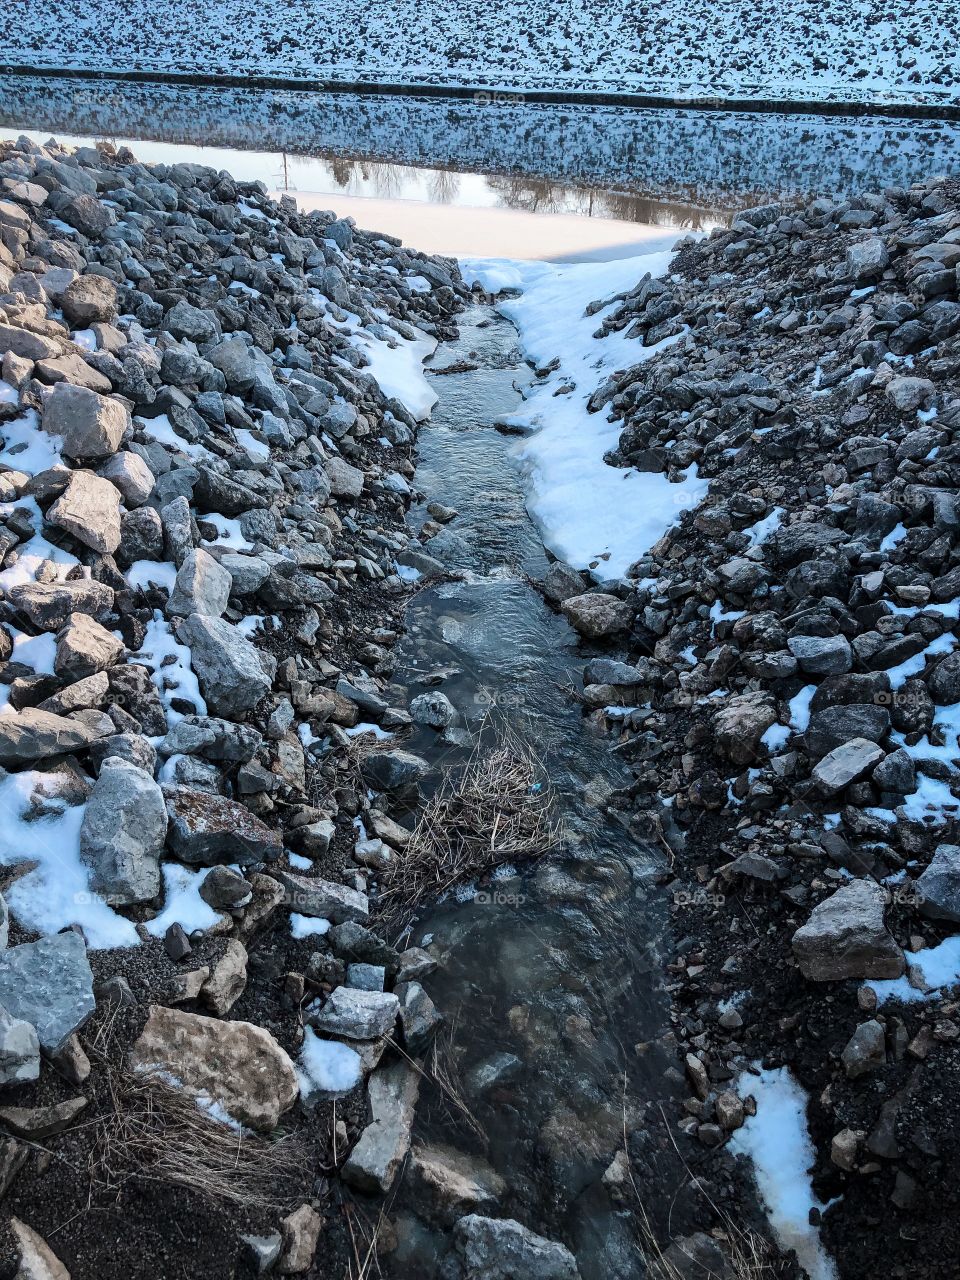 Cool creek in the winter